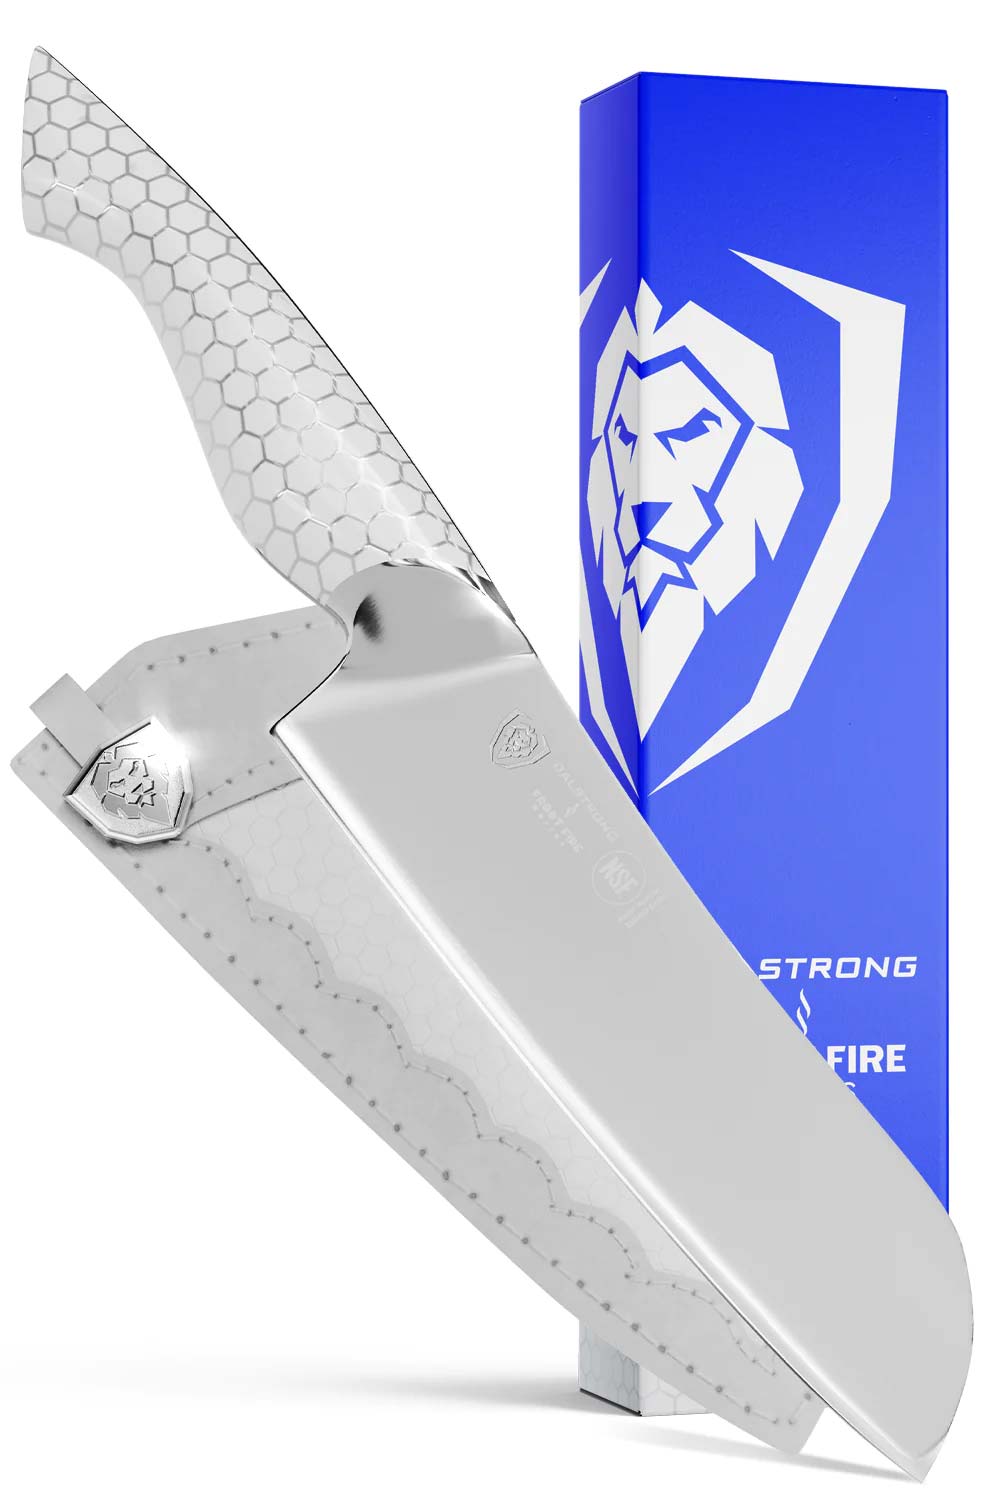 Dalstrong frost fire series 7 inch santoku knife with white handle in front of it's premium packaging.